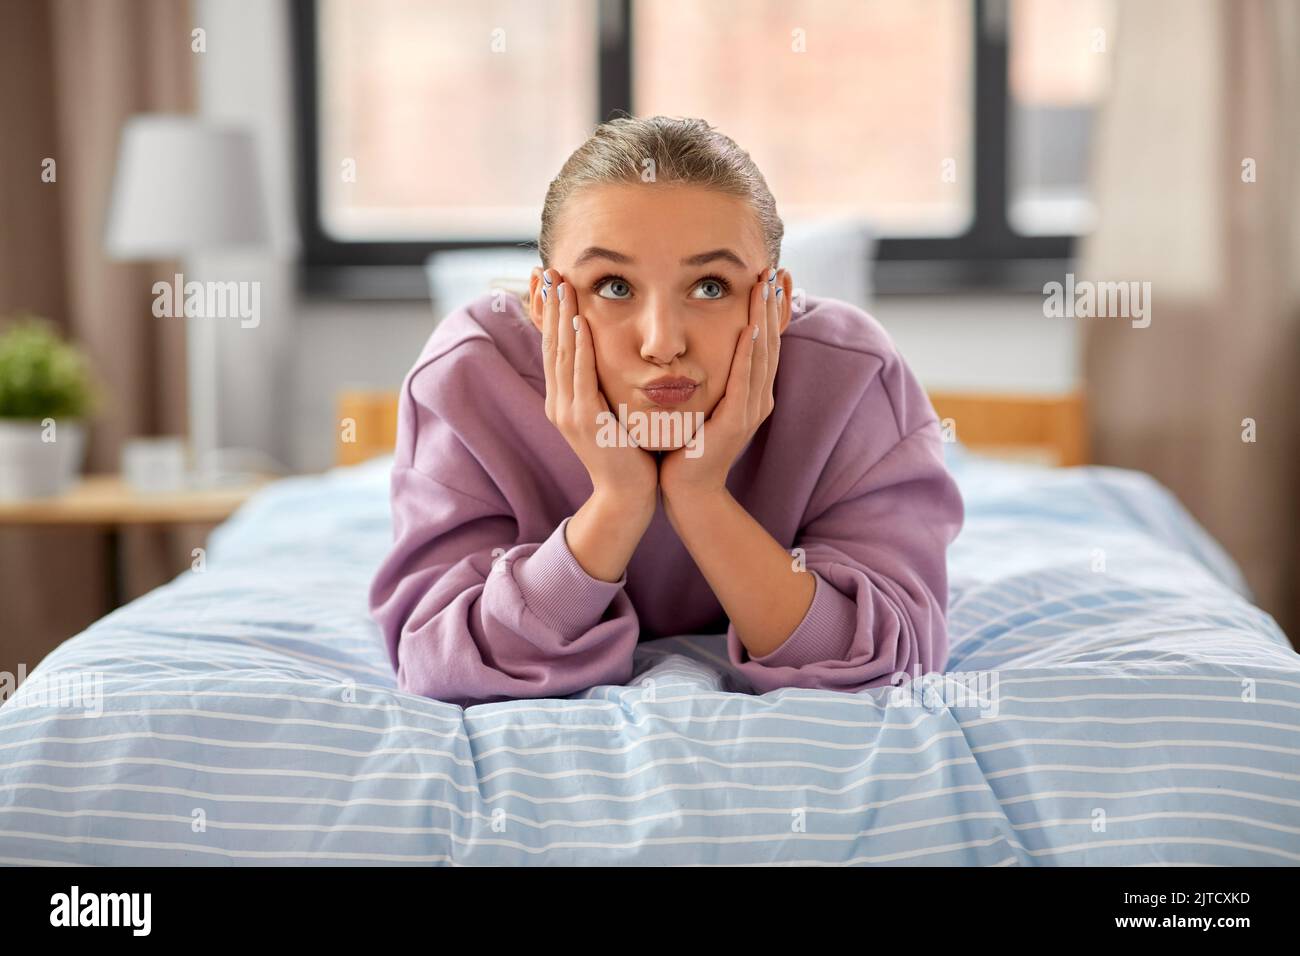 girl lying on bed at home and making face Stock Photo